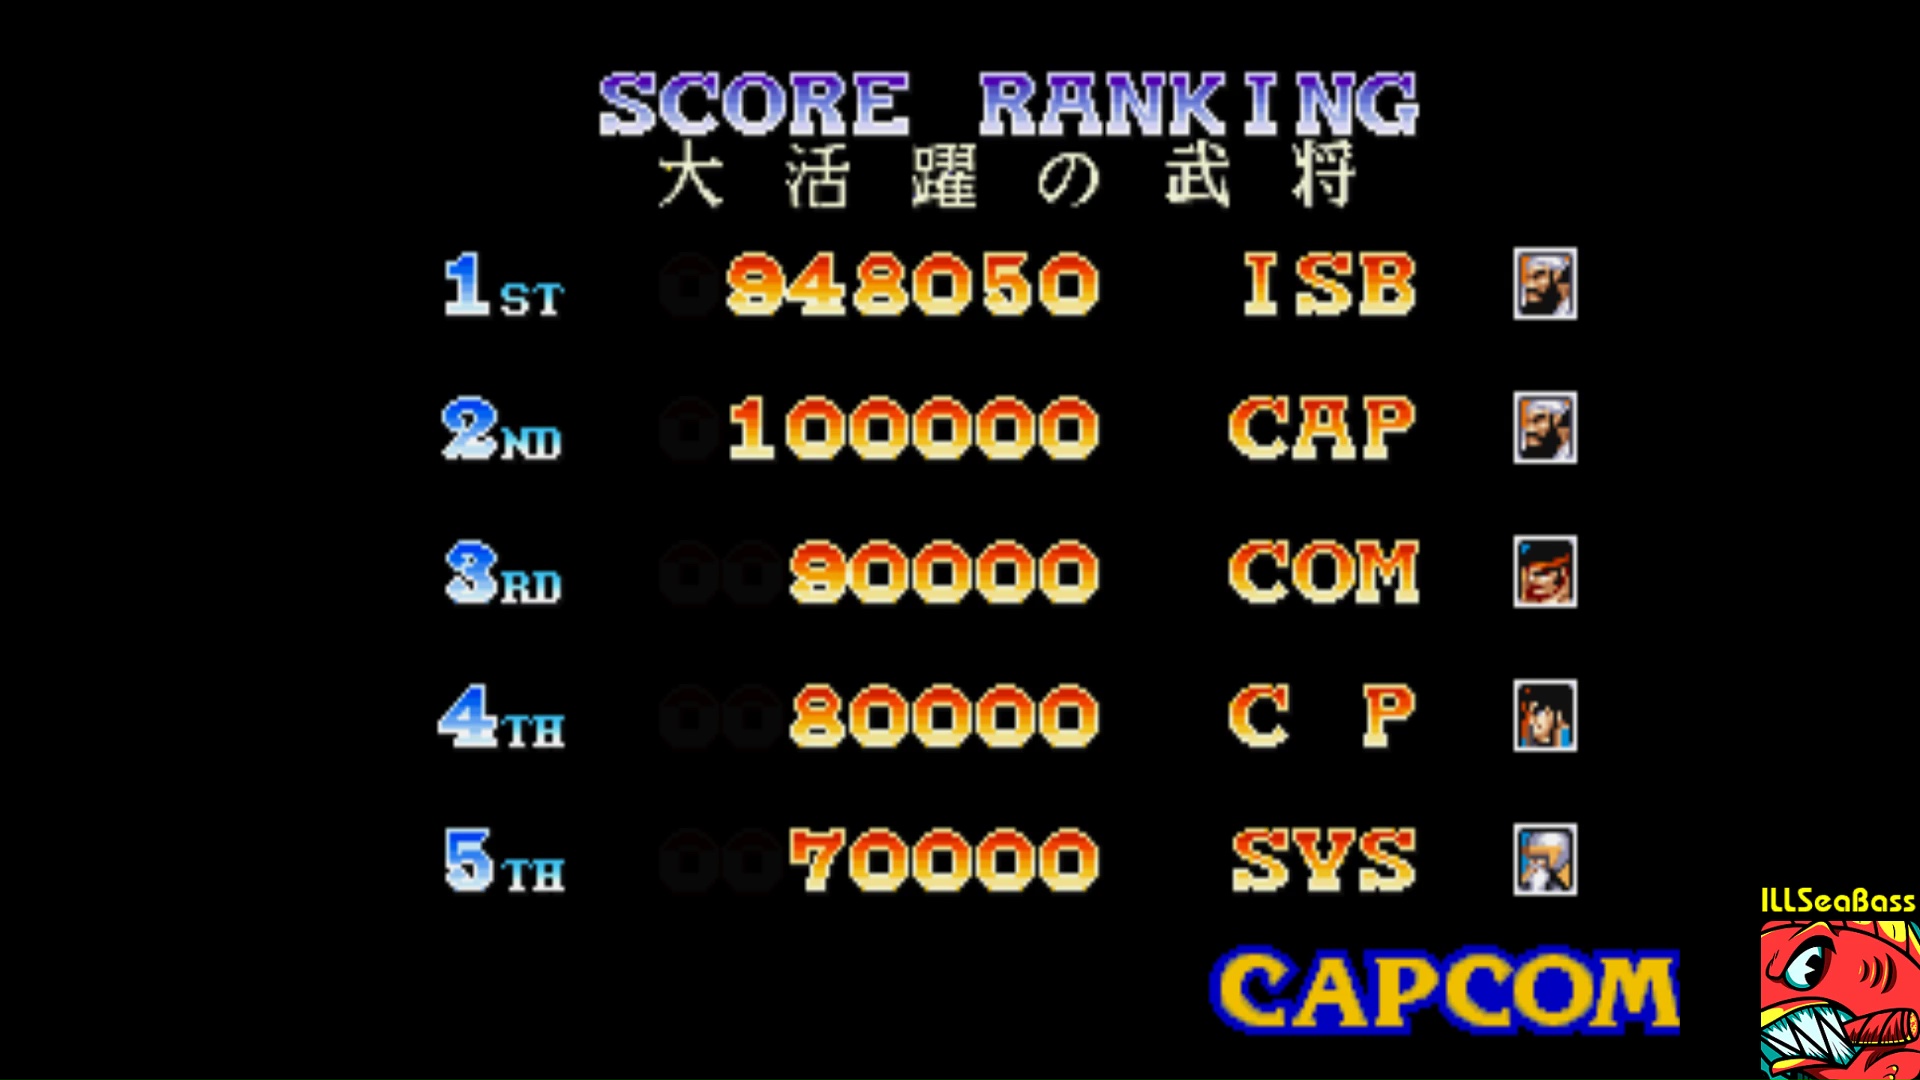 ILLSeaBass: Warriors Of Fate [Easy] (Playstation 1 Emulated) 948,050 points on 2017-11-12 18:50:44